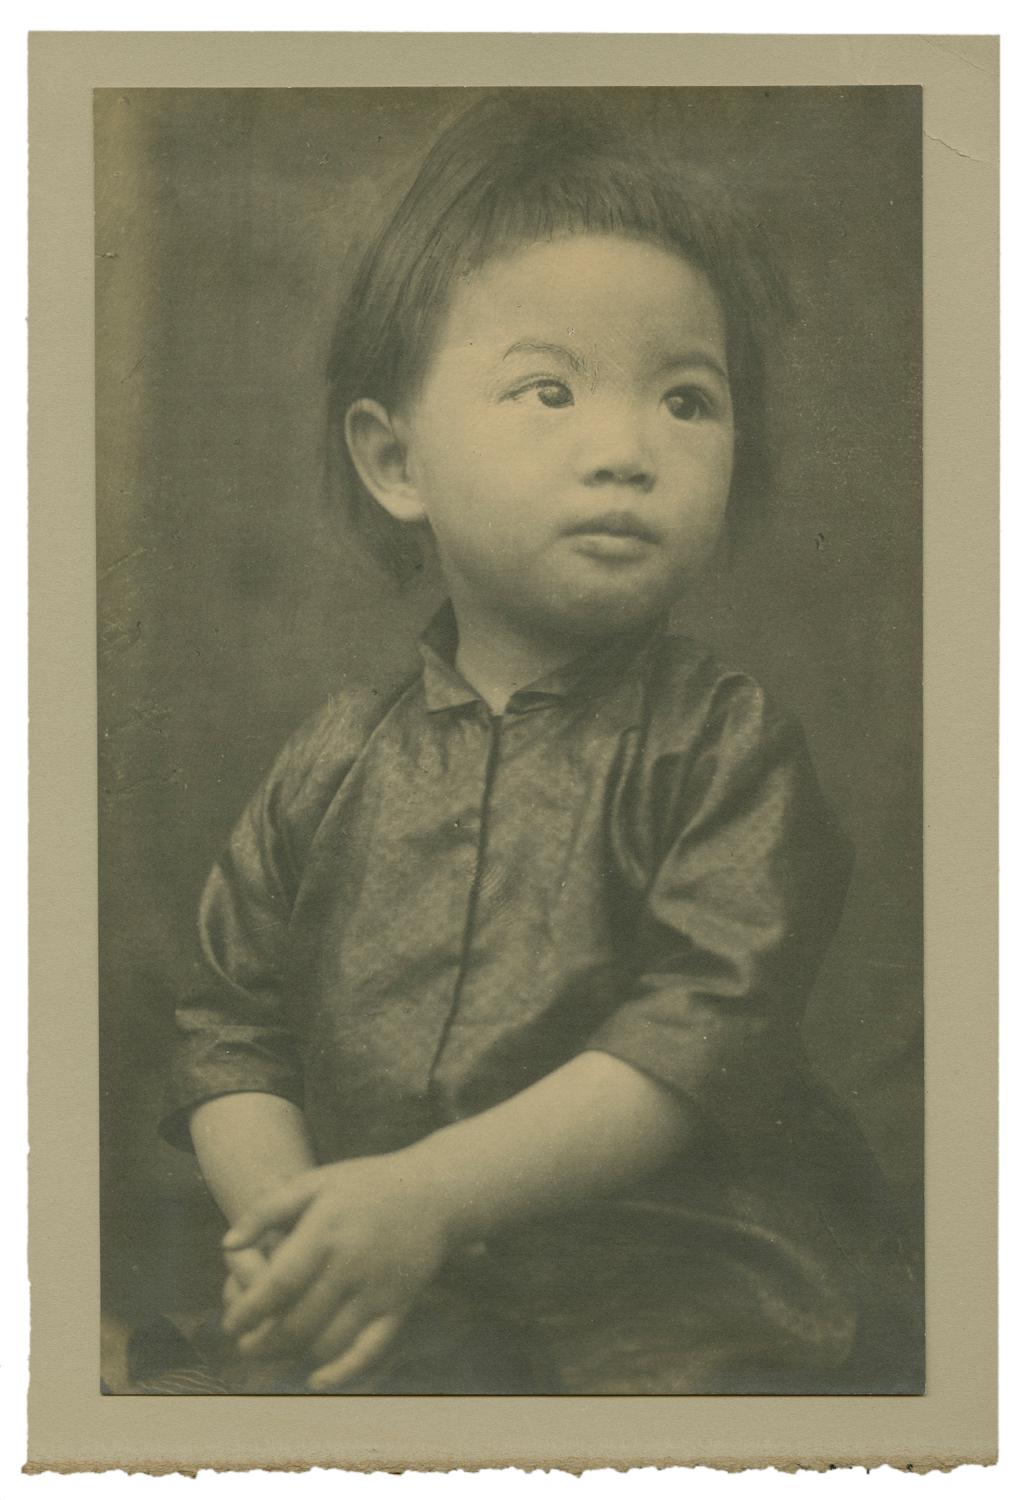 Studio portrait of a child facing right, looking up, hands clasped. Black and white photograph by Minna Keene.